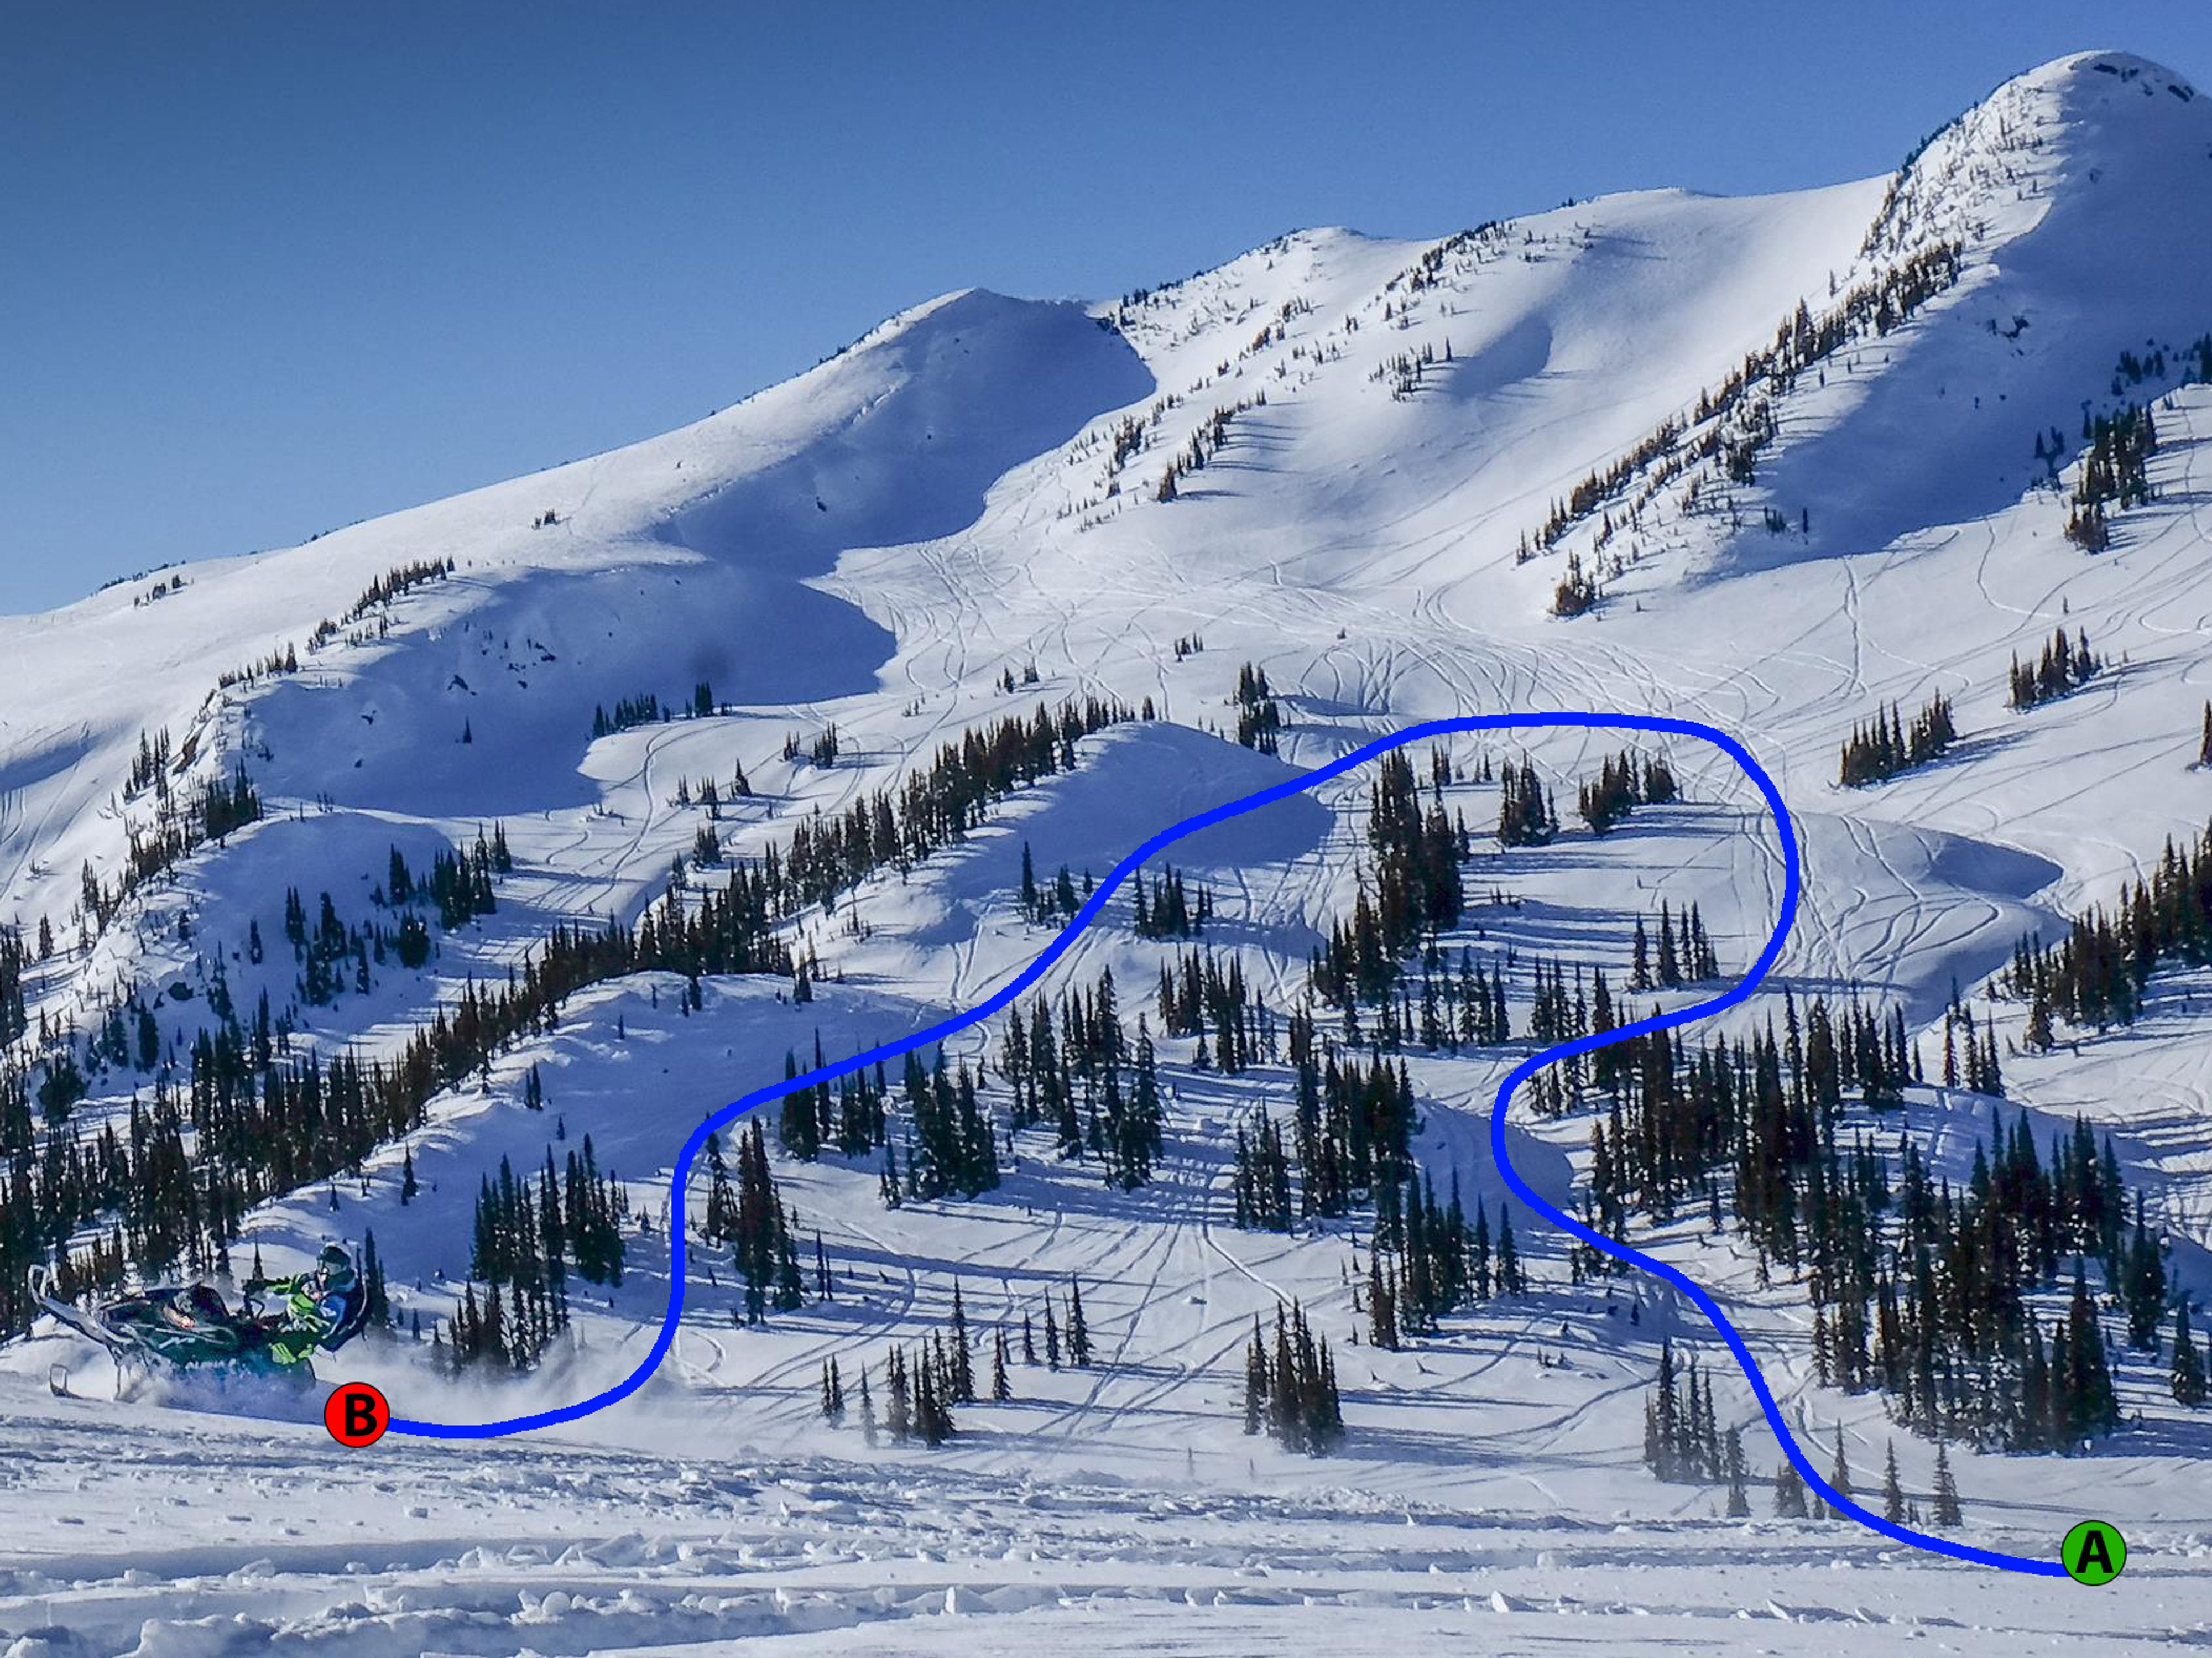 This is challenging terrain and the avalanche danger is considerable.